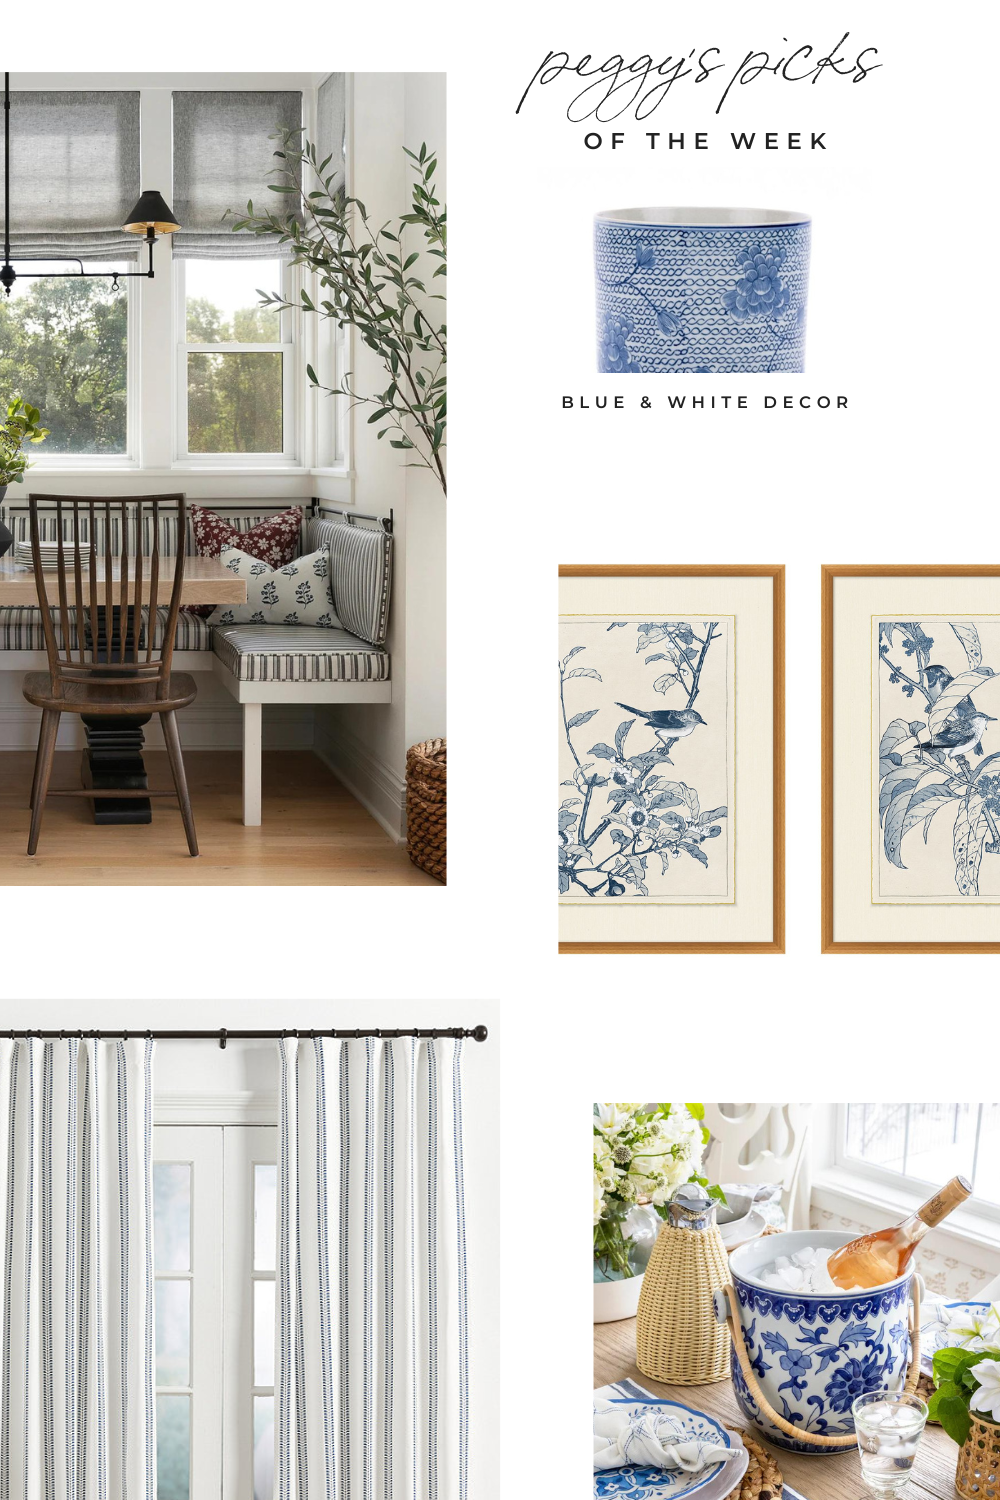 Peggy's Picks of the Week Blue & White Decor